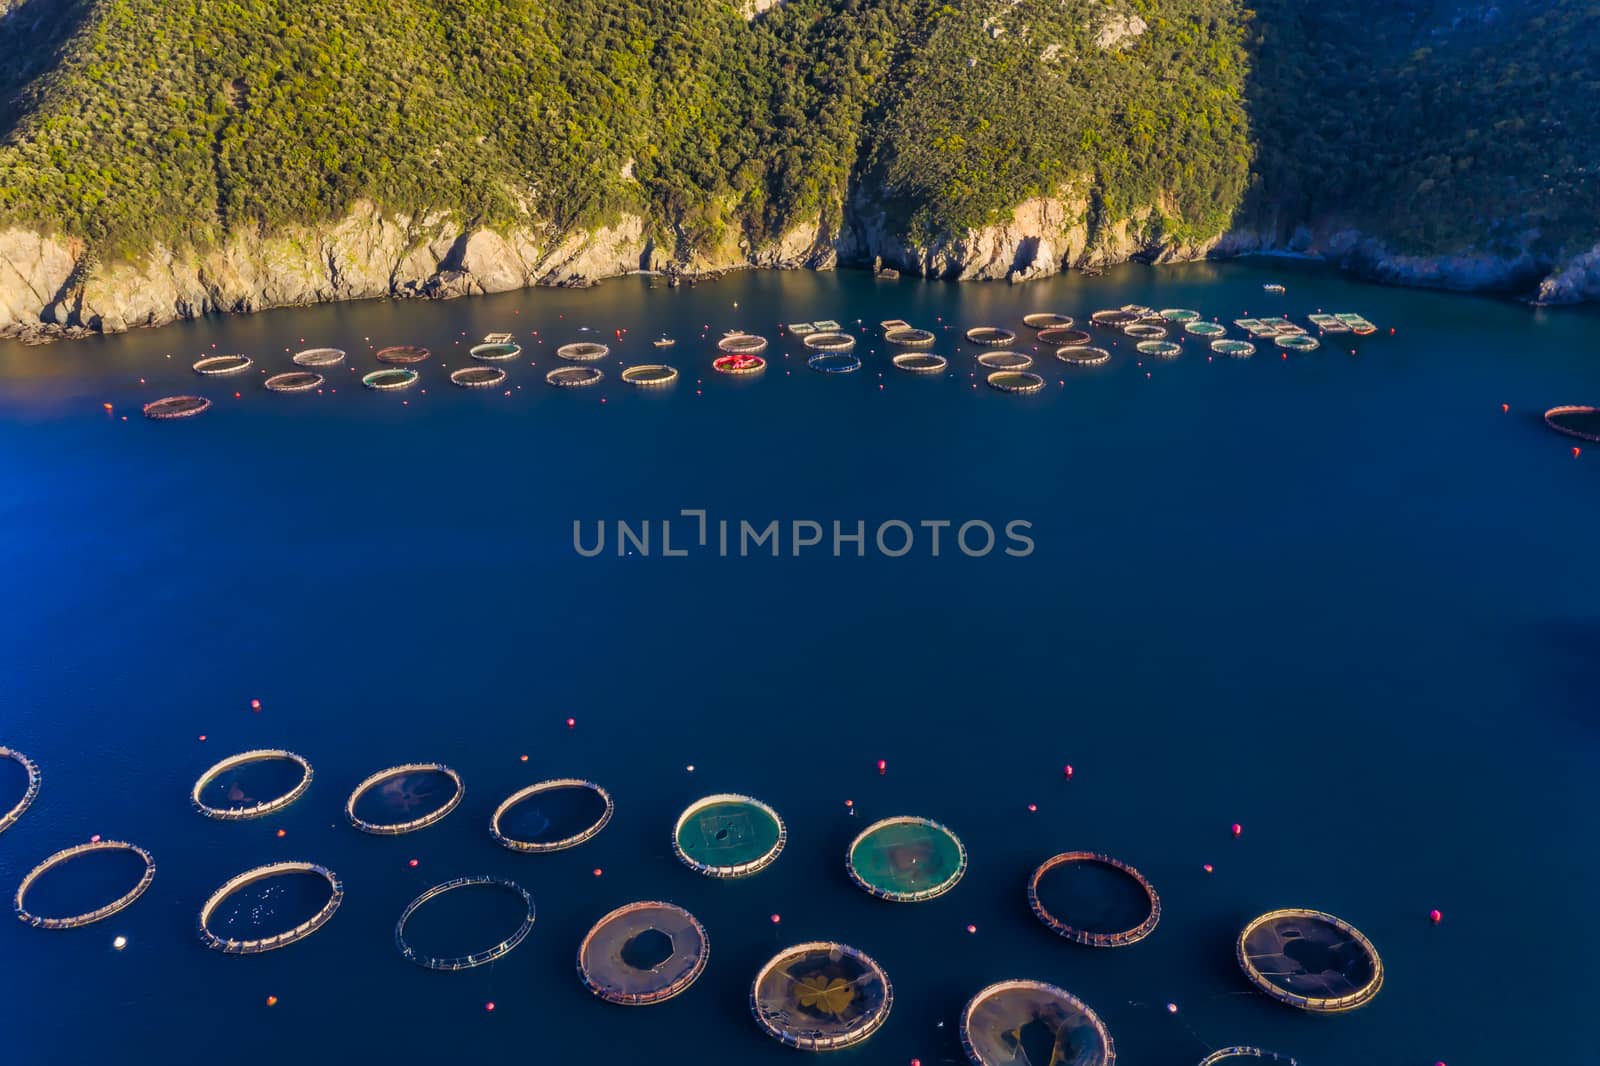 Fish farm with floating cages in Chalkidiki, Greece by ververidis